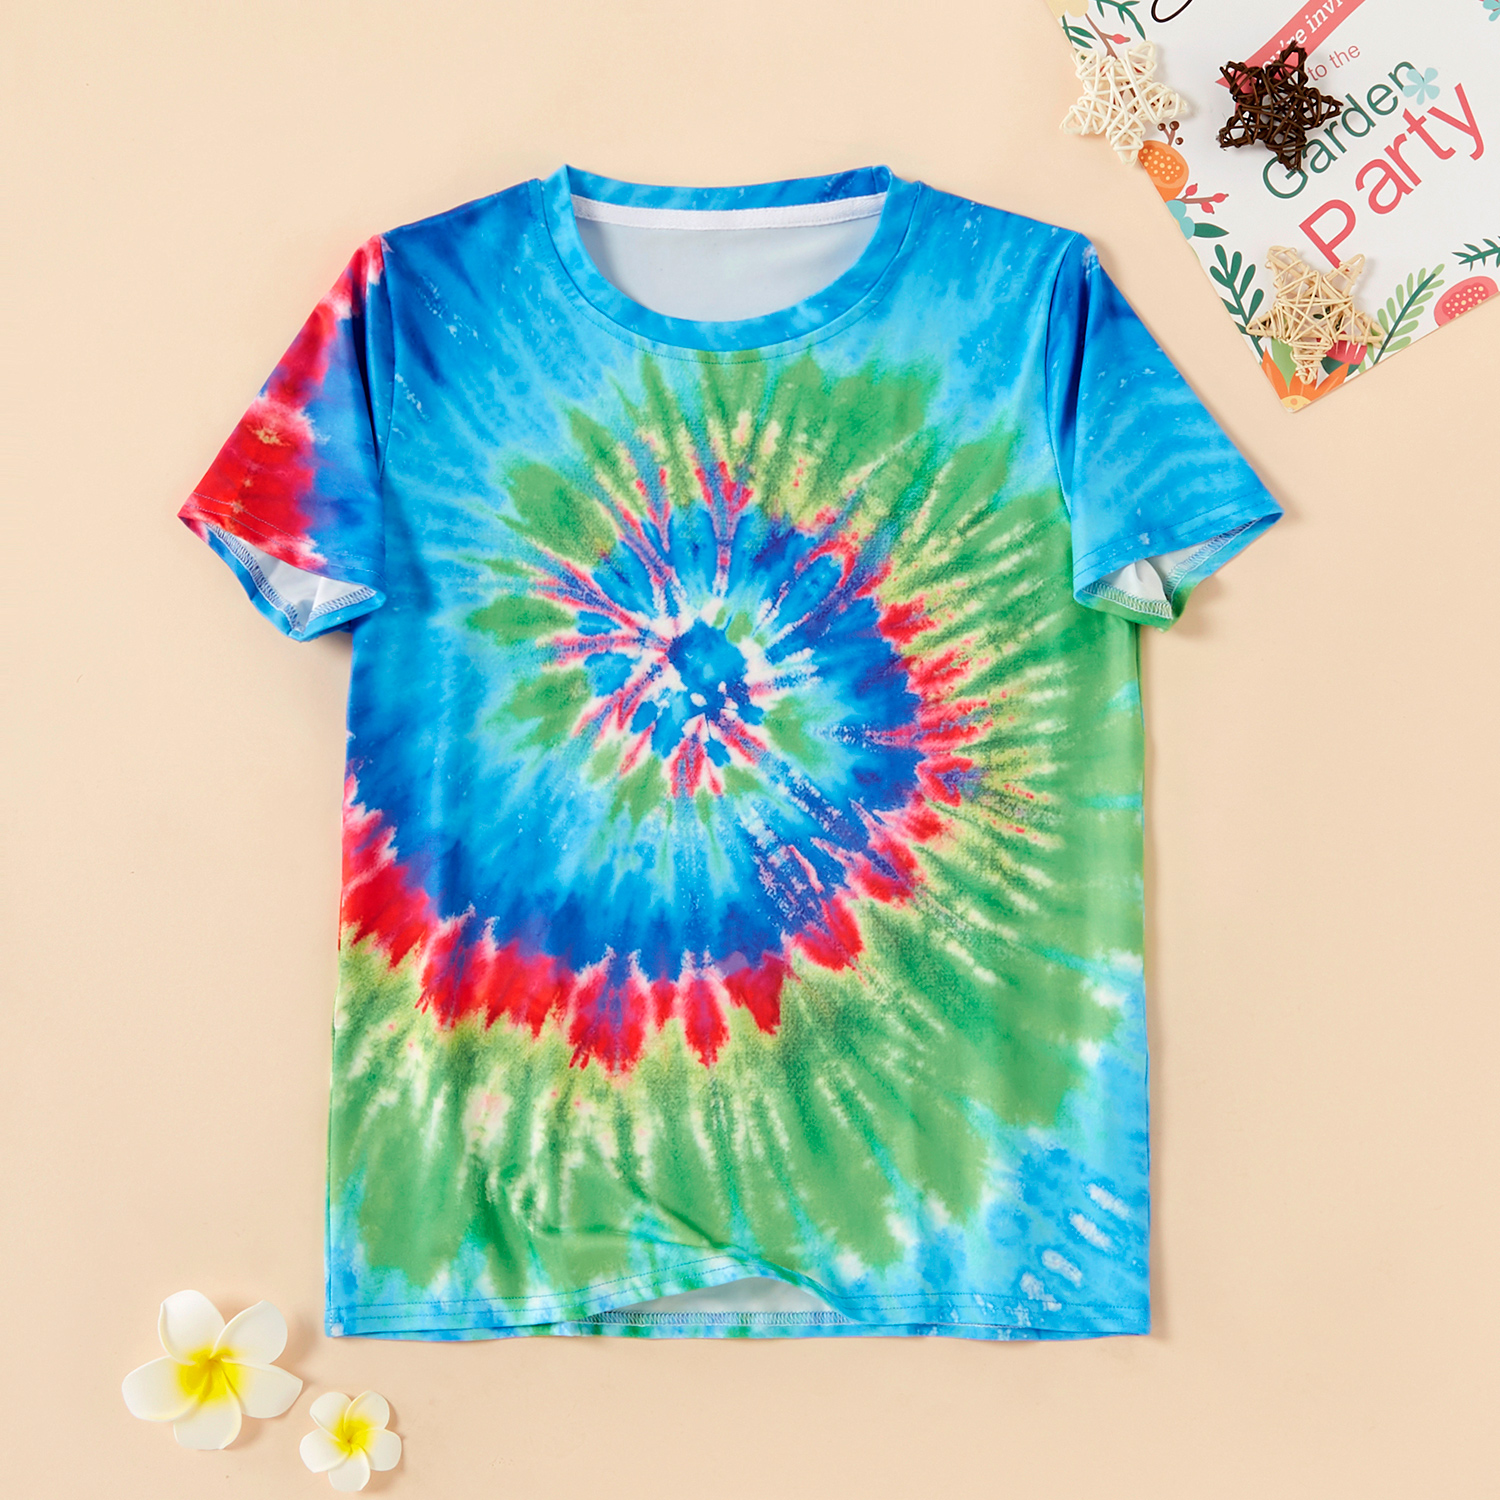 Trendy Colorful Tie-dyed Short-sleeve Tee